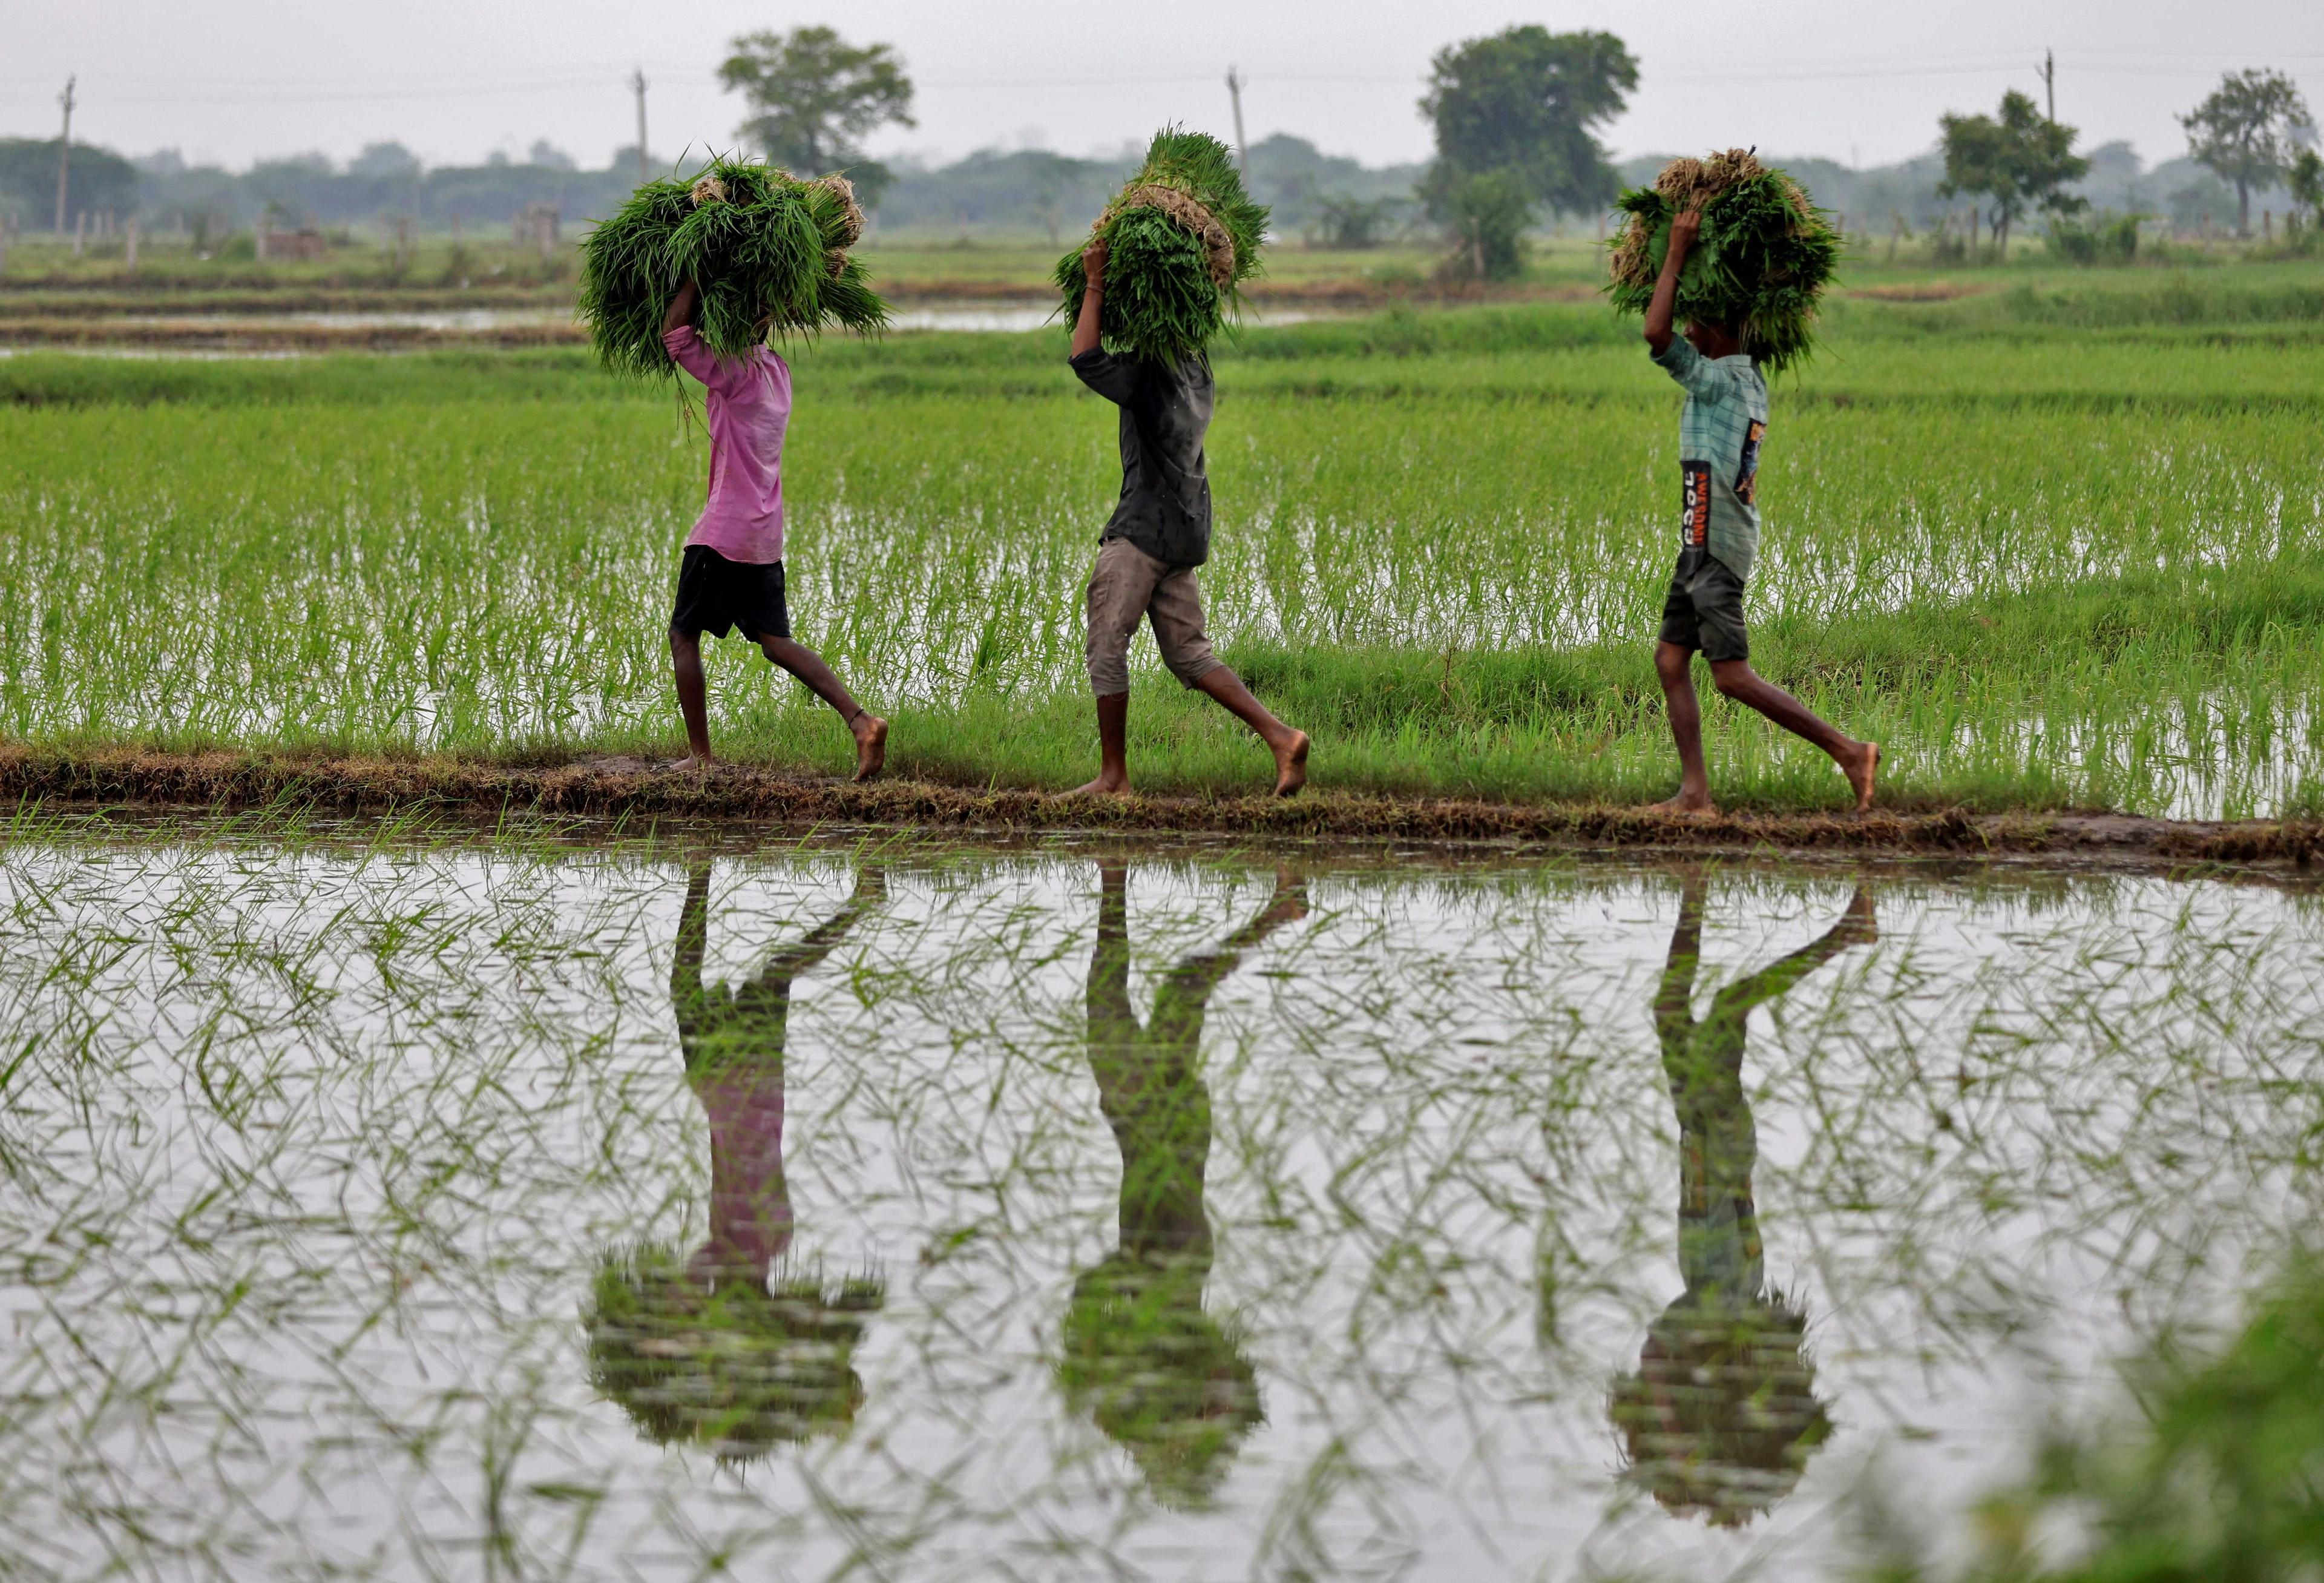 Farm labourers carry rice saplings for planting in a field on the outskirts of Ahmedabad, India, July 21. Photo: Reuters